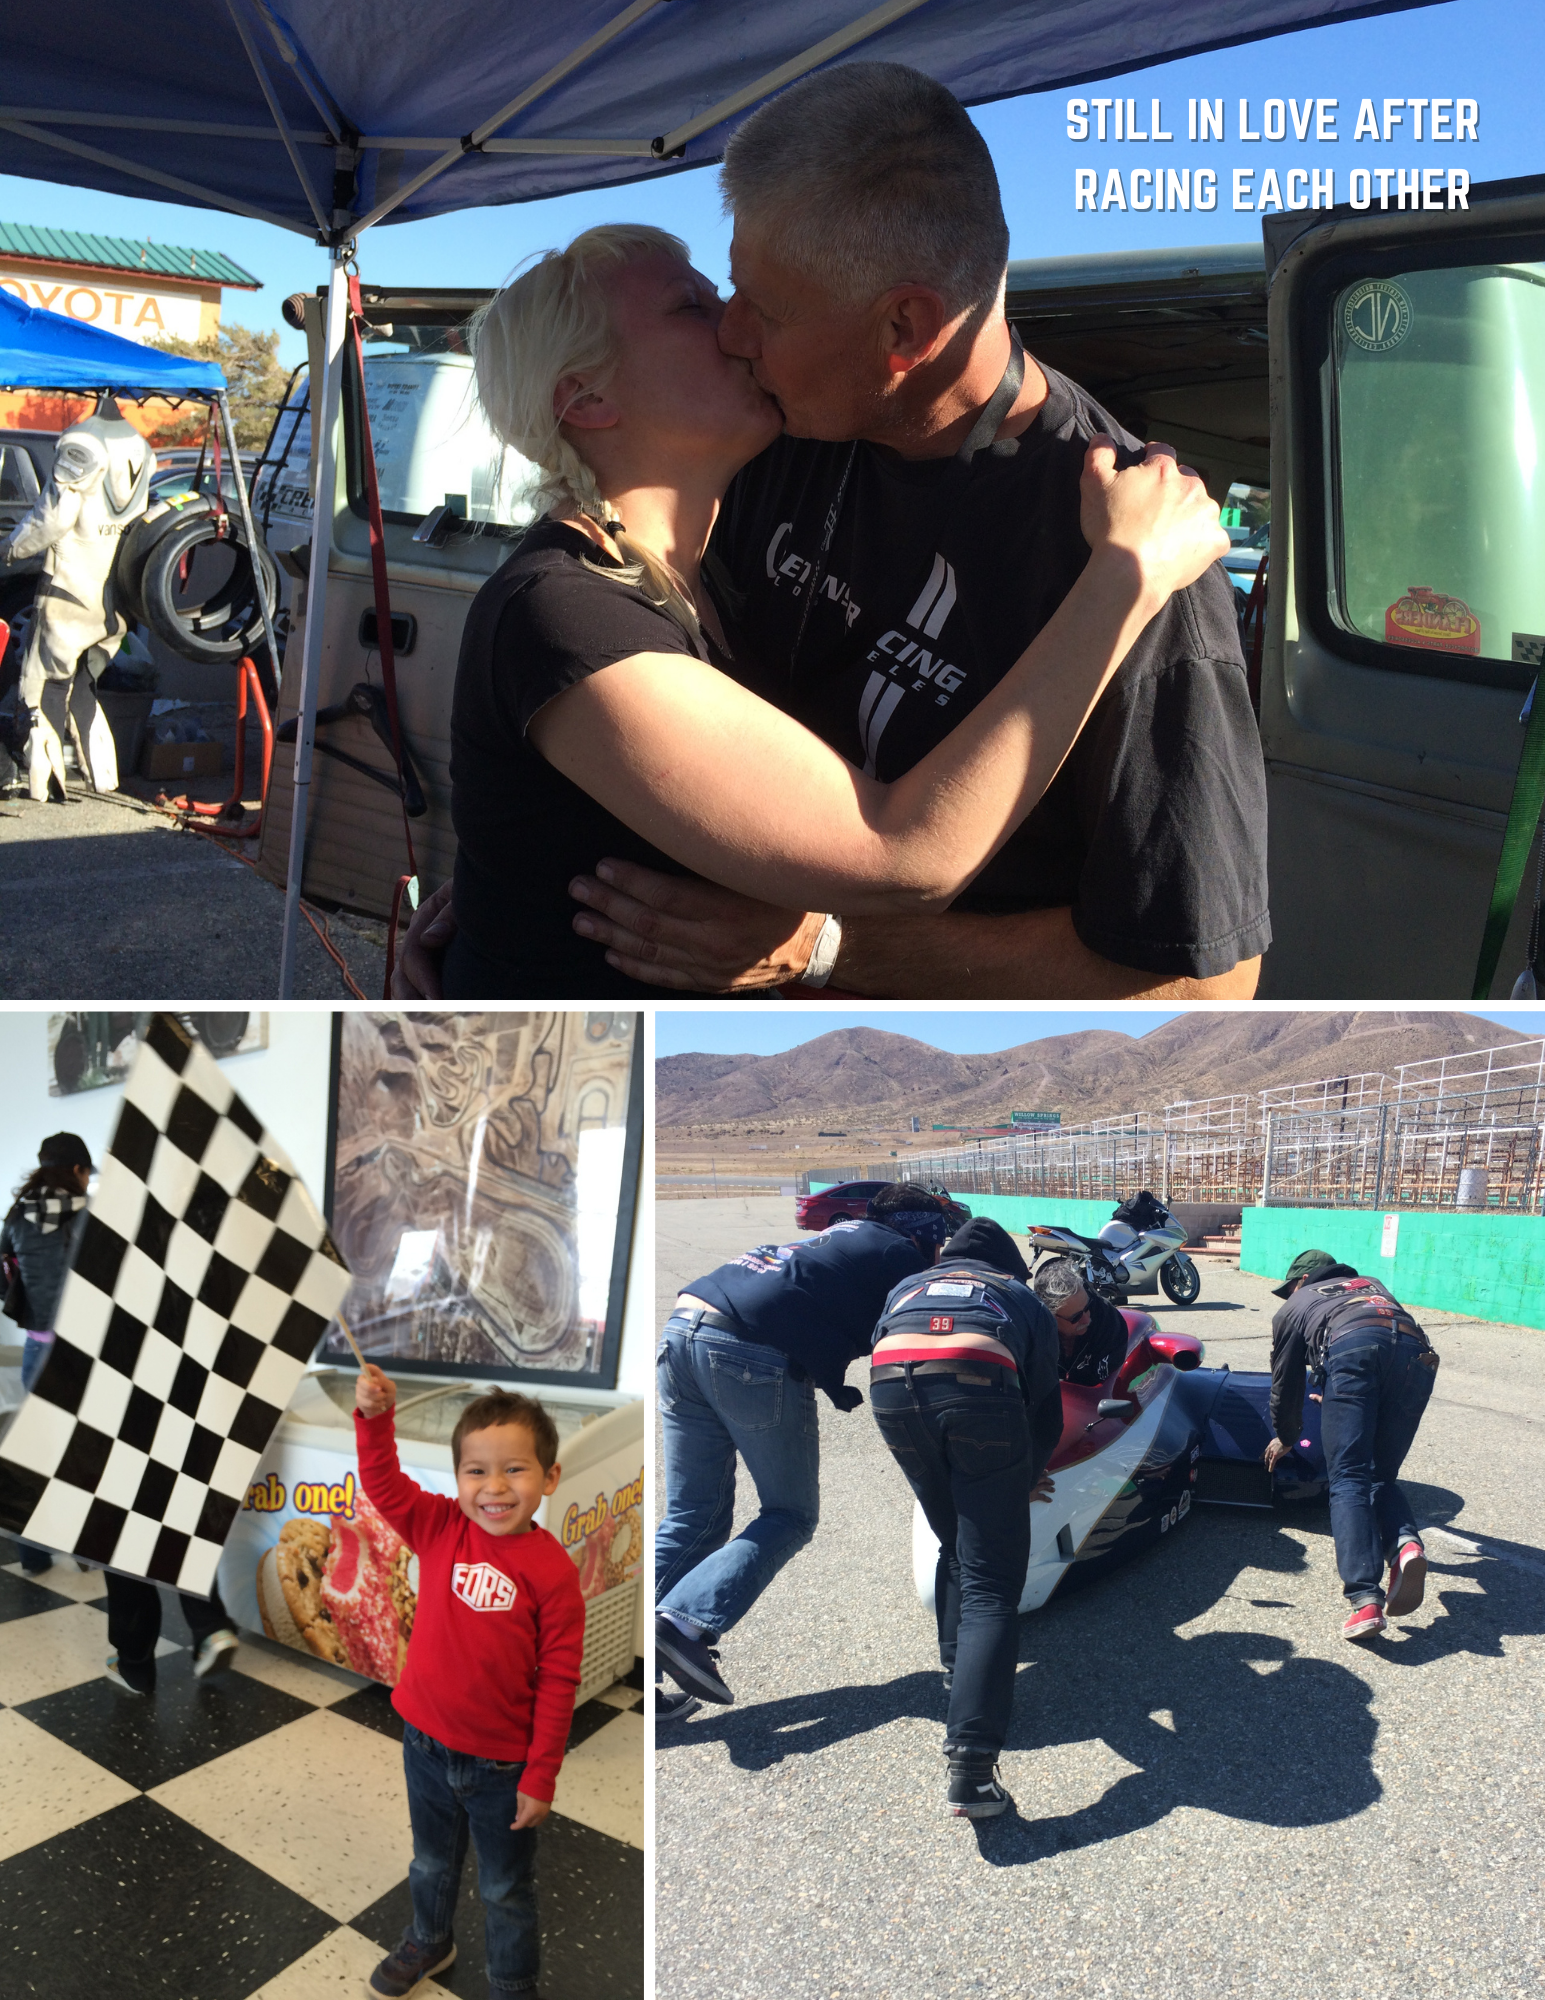 Two motorcyclists kissing: still in love after racing each other